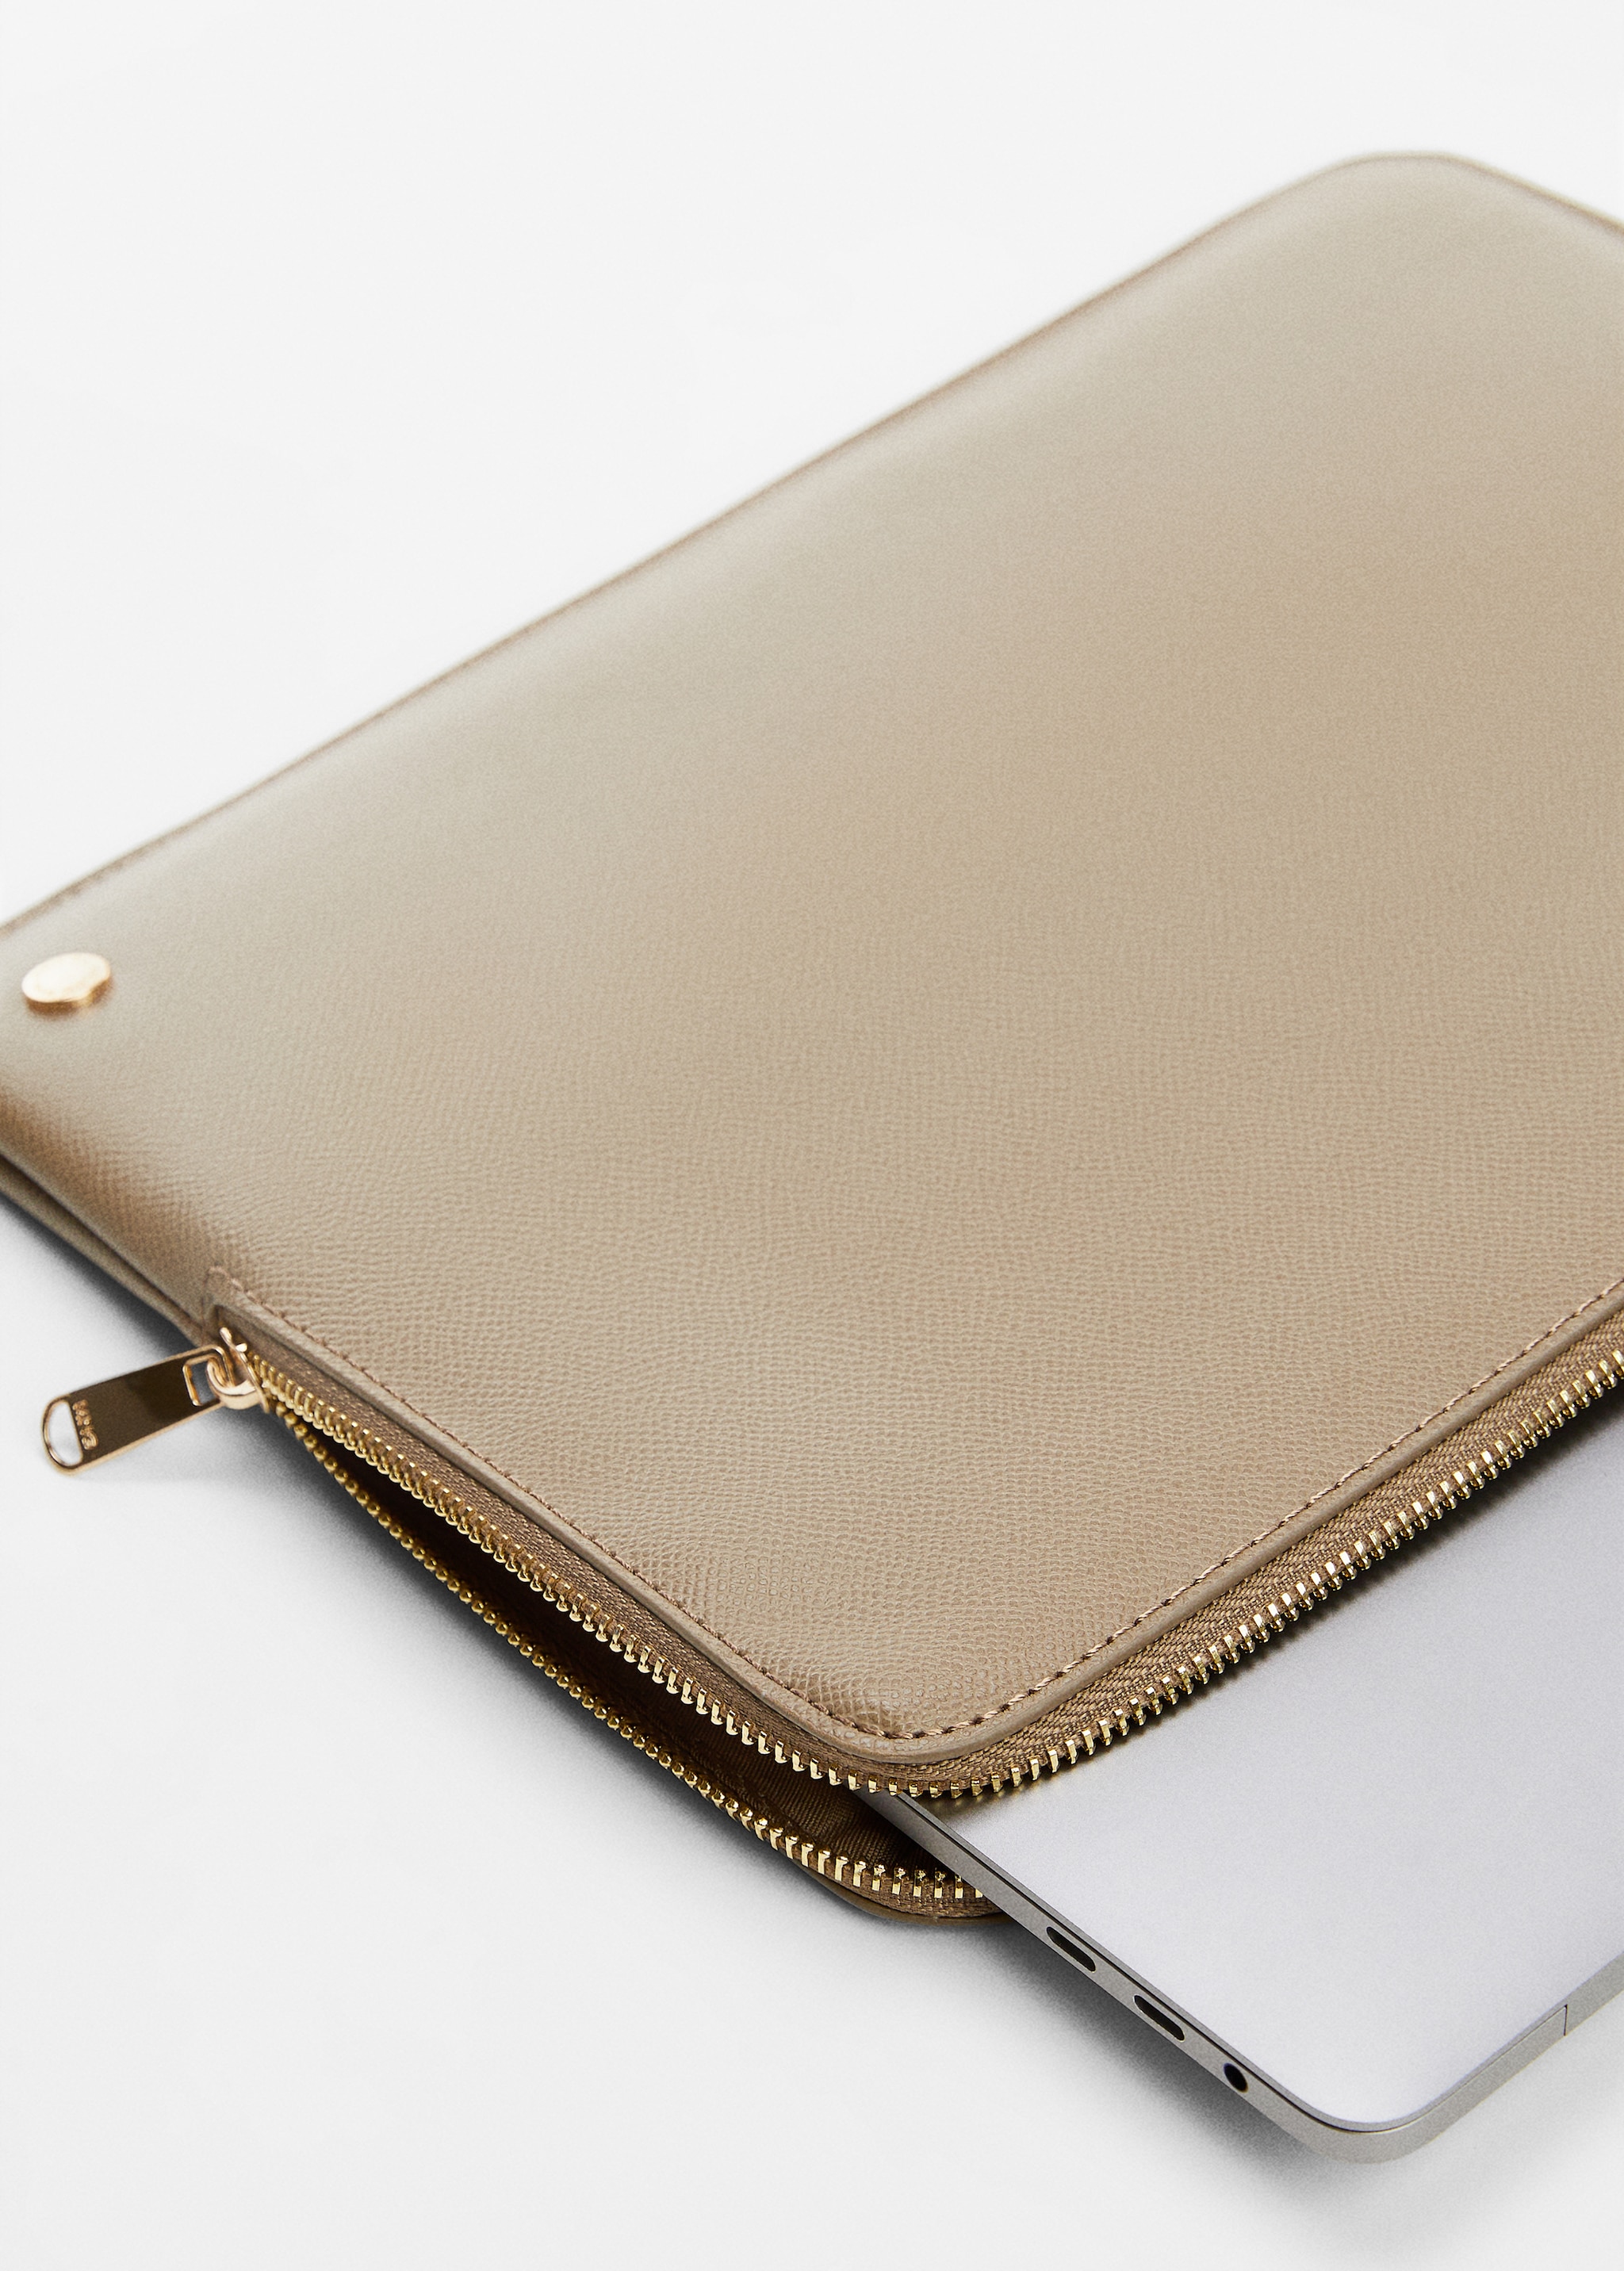 Safiano-effect laptop case - Details of the article 2